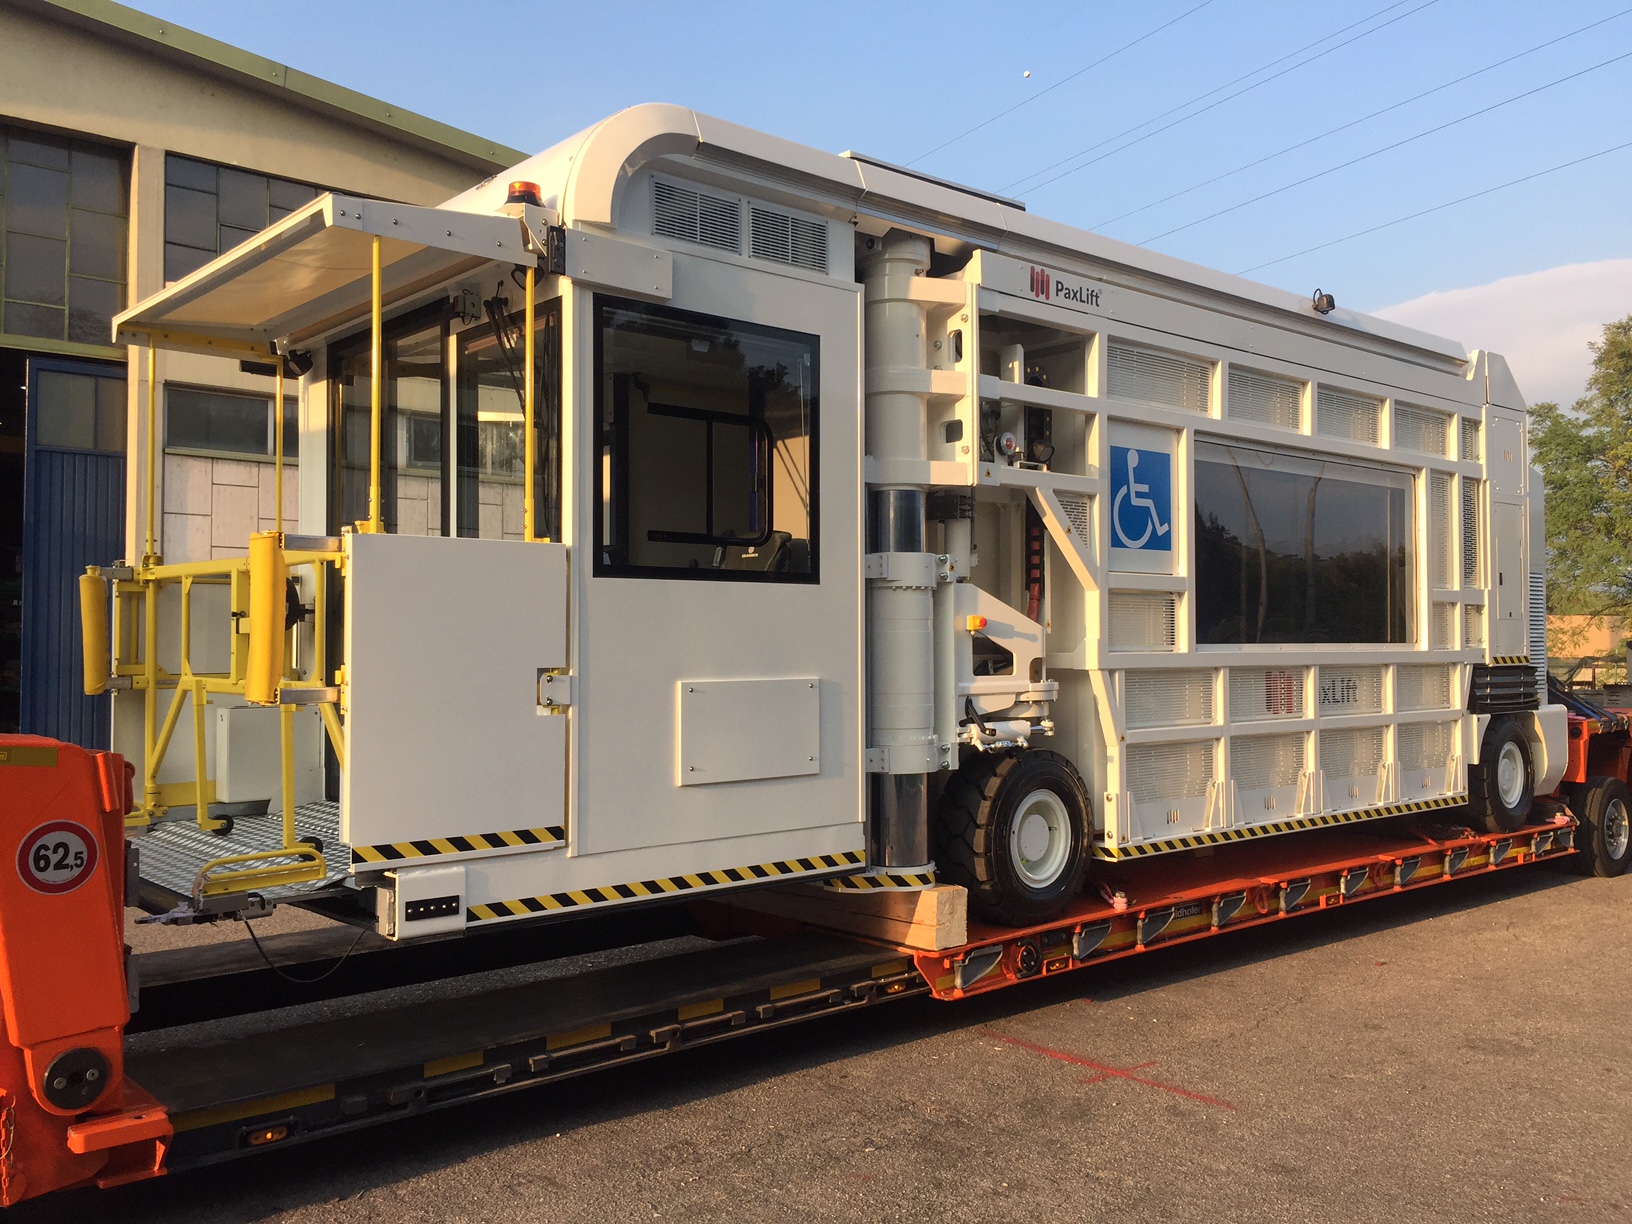 paxlift-ambulift-takes-to-the-road